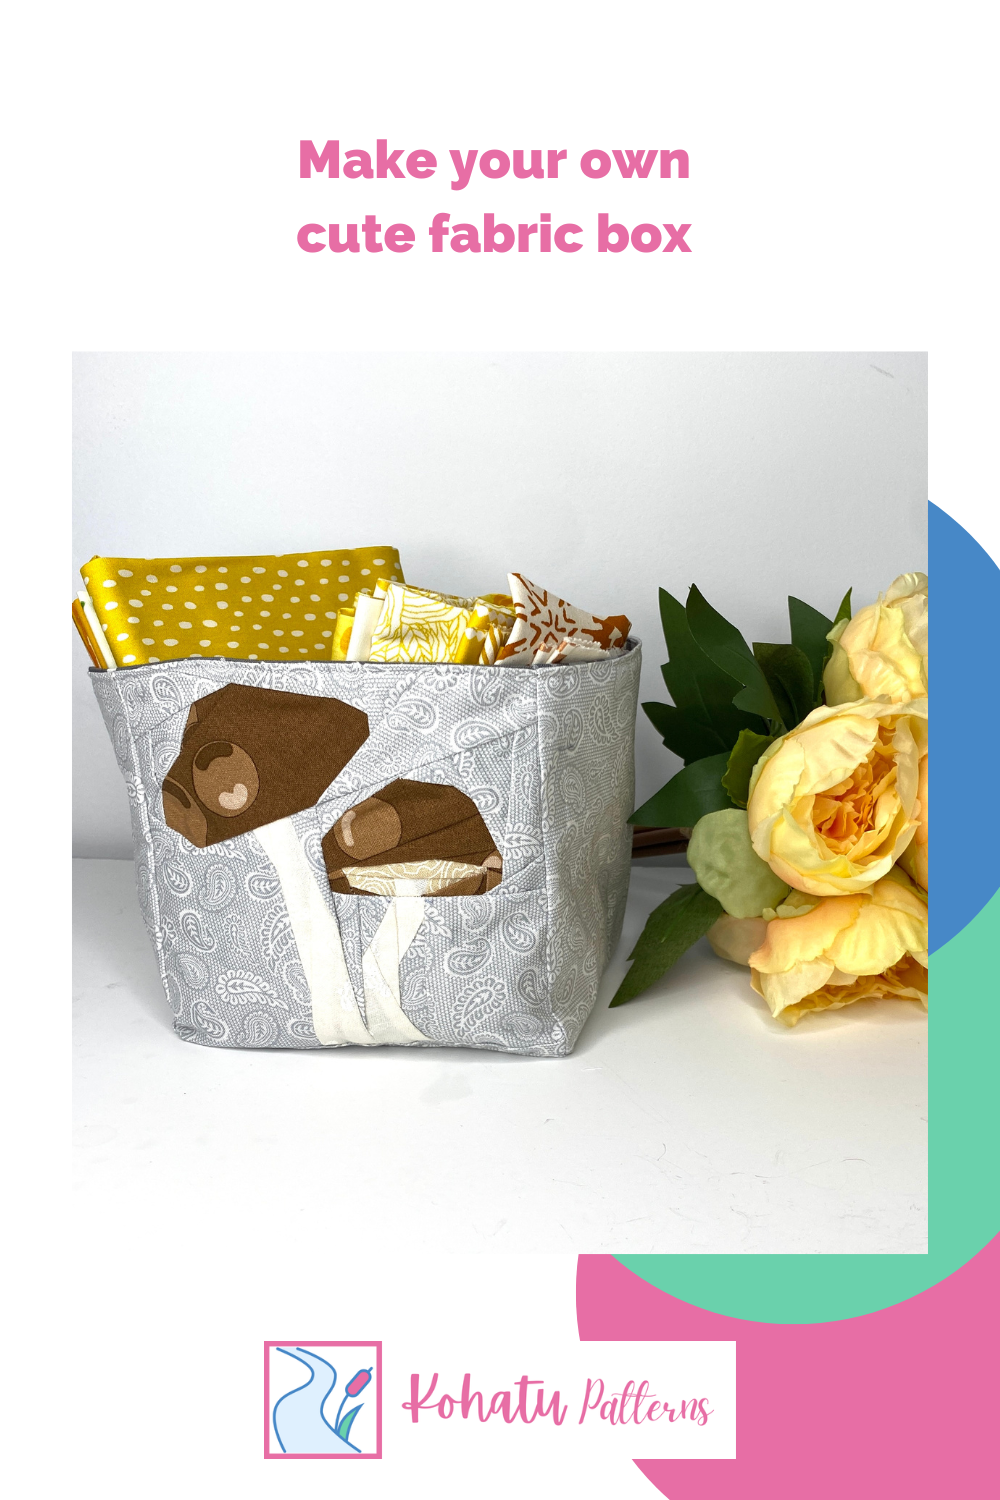 You can make your own storage boxes using fabric scraps. This cute storage box has a Mushroom quilt block on the front and has been filled with fat quarters. It was simple to make and can be used for storing sewing supplies, stationary or other items arou